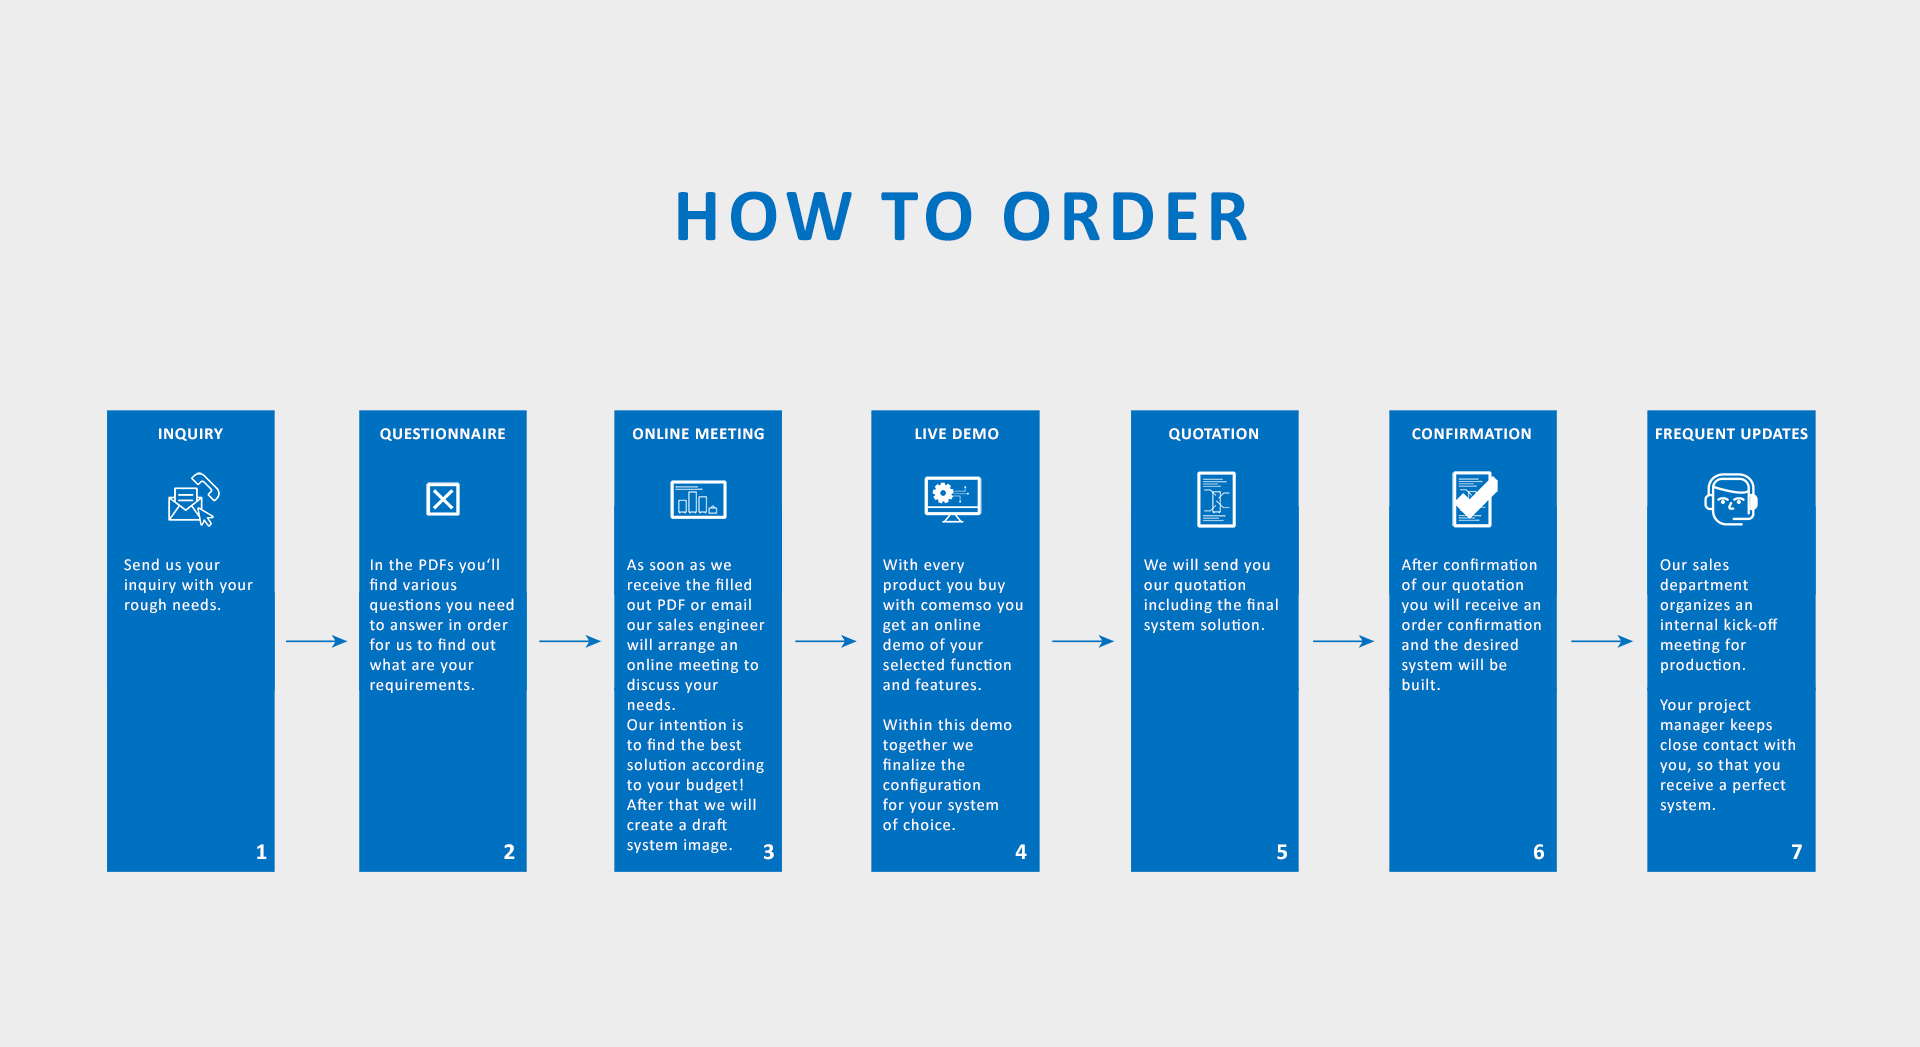 How to order 7 steps